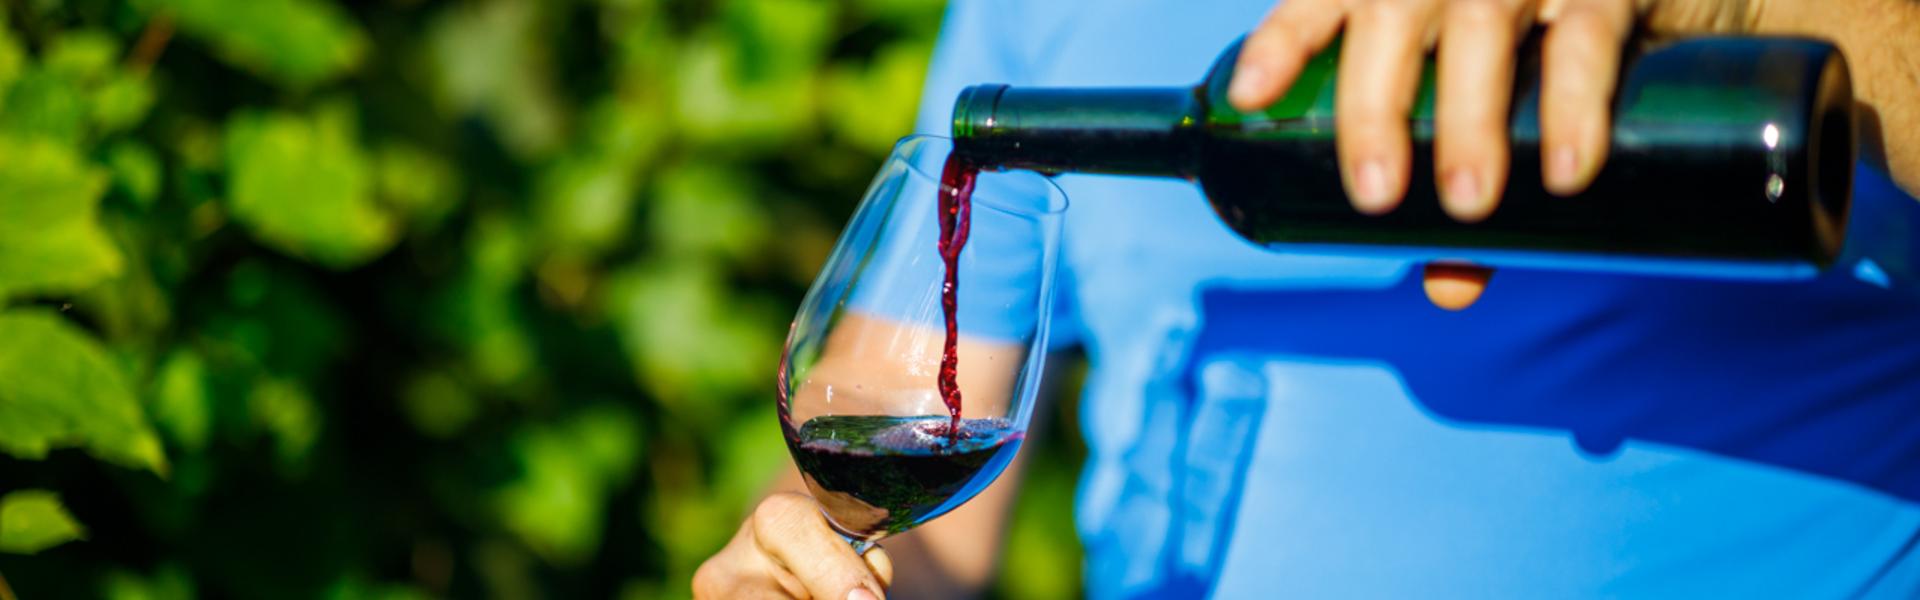 Man pouring wine into a glass against a background of a vine